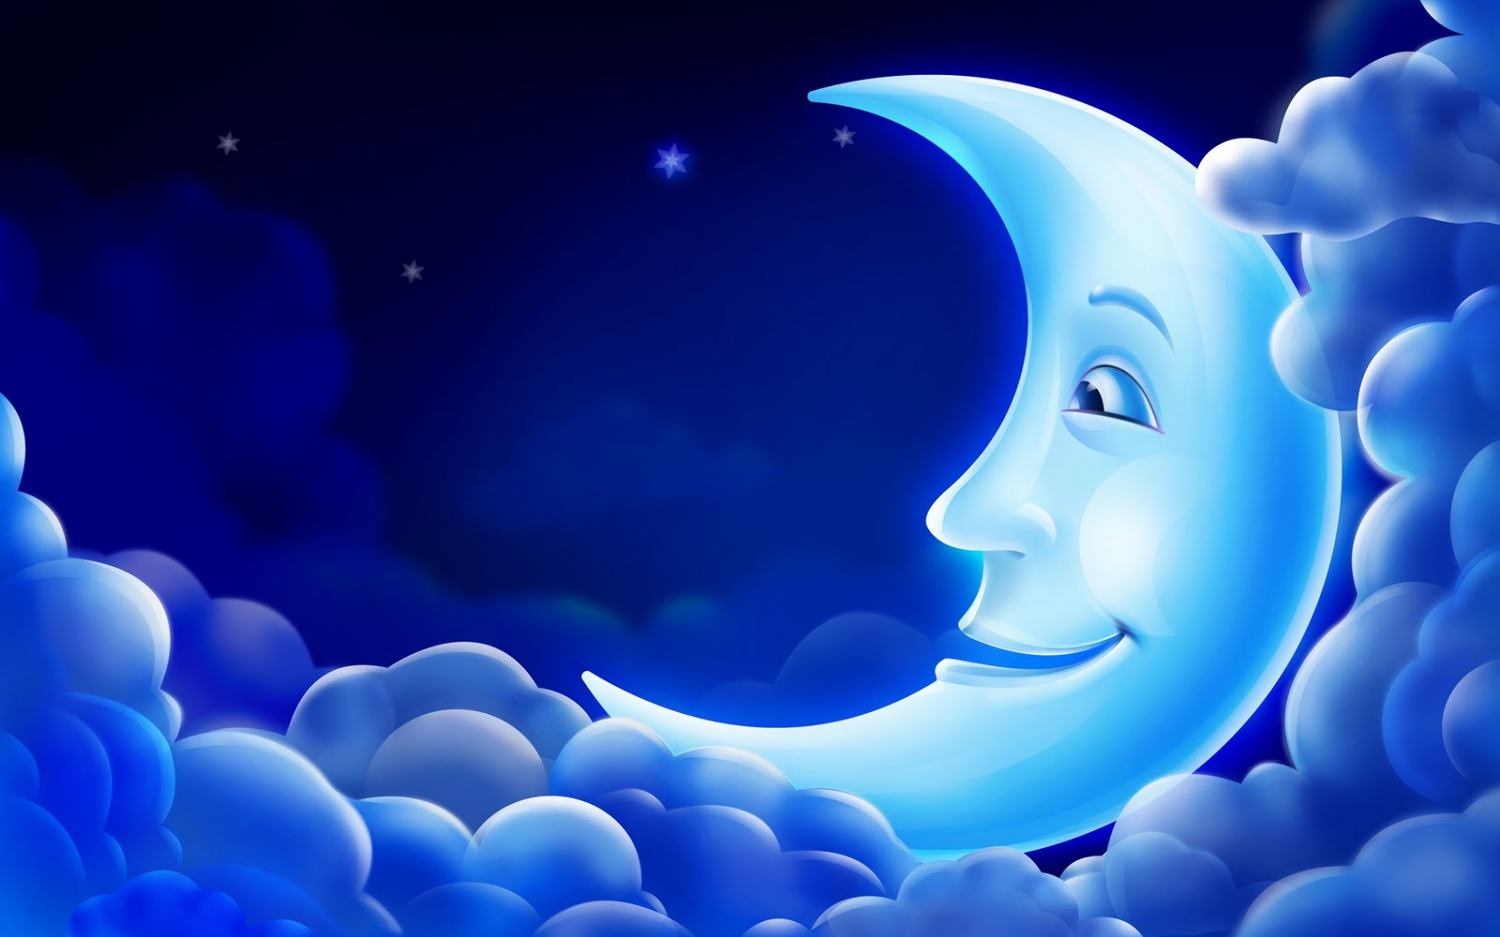 cg 3d animation pc background blue moon smile sky star wallpapers 1